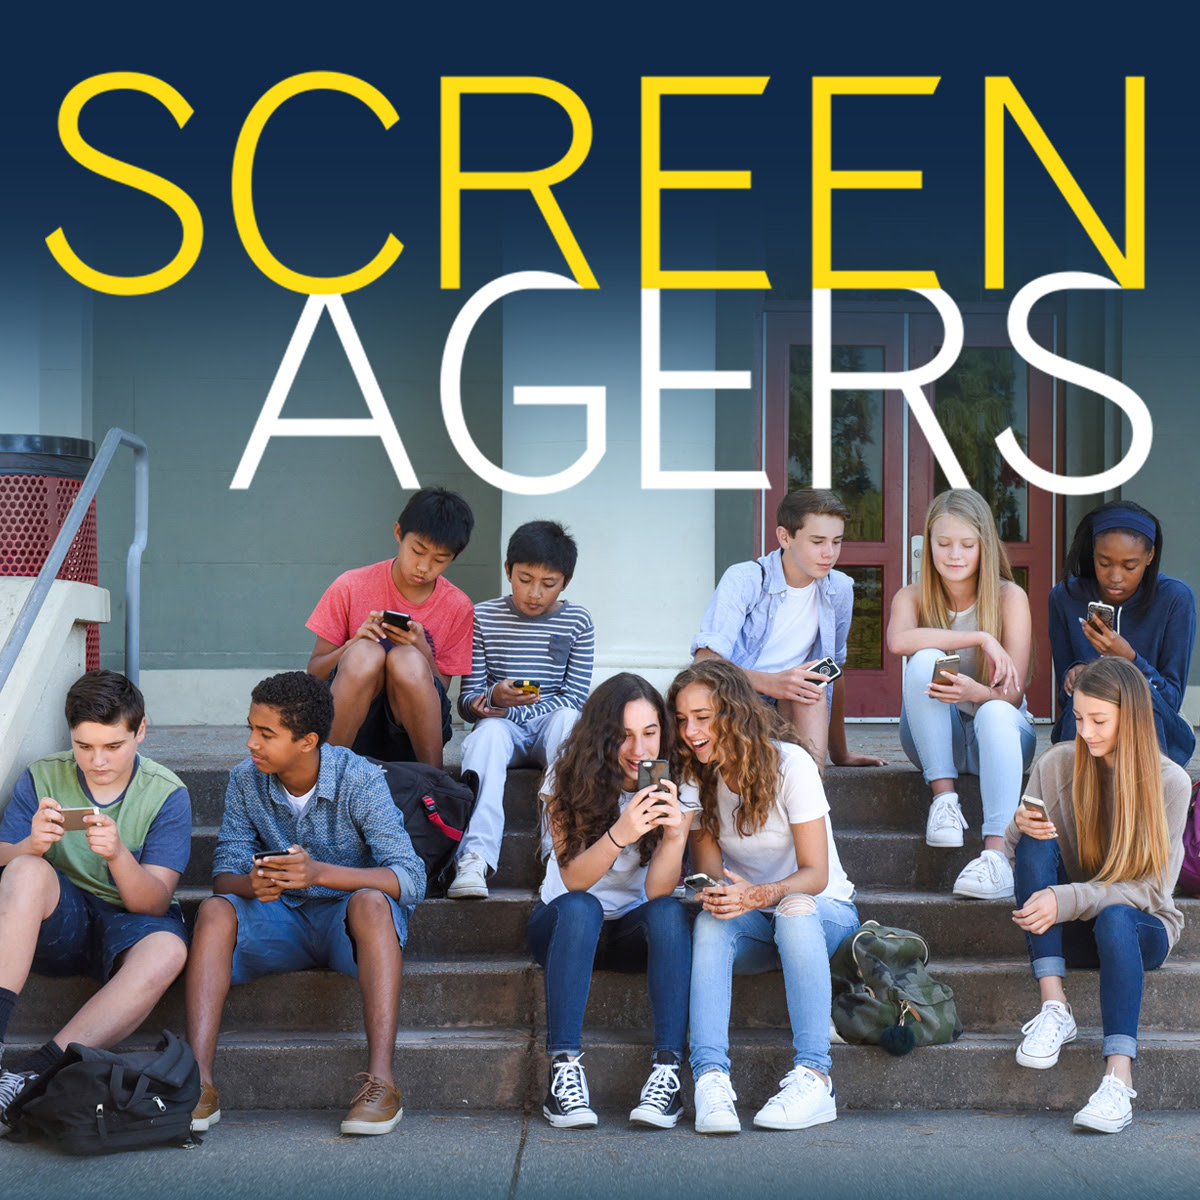 Screenagers Film Presented By Chisago County Public Health